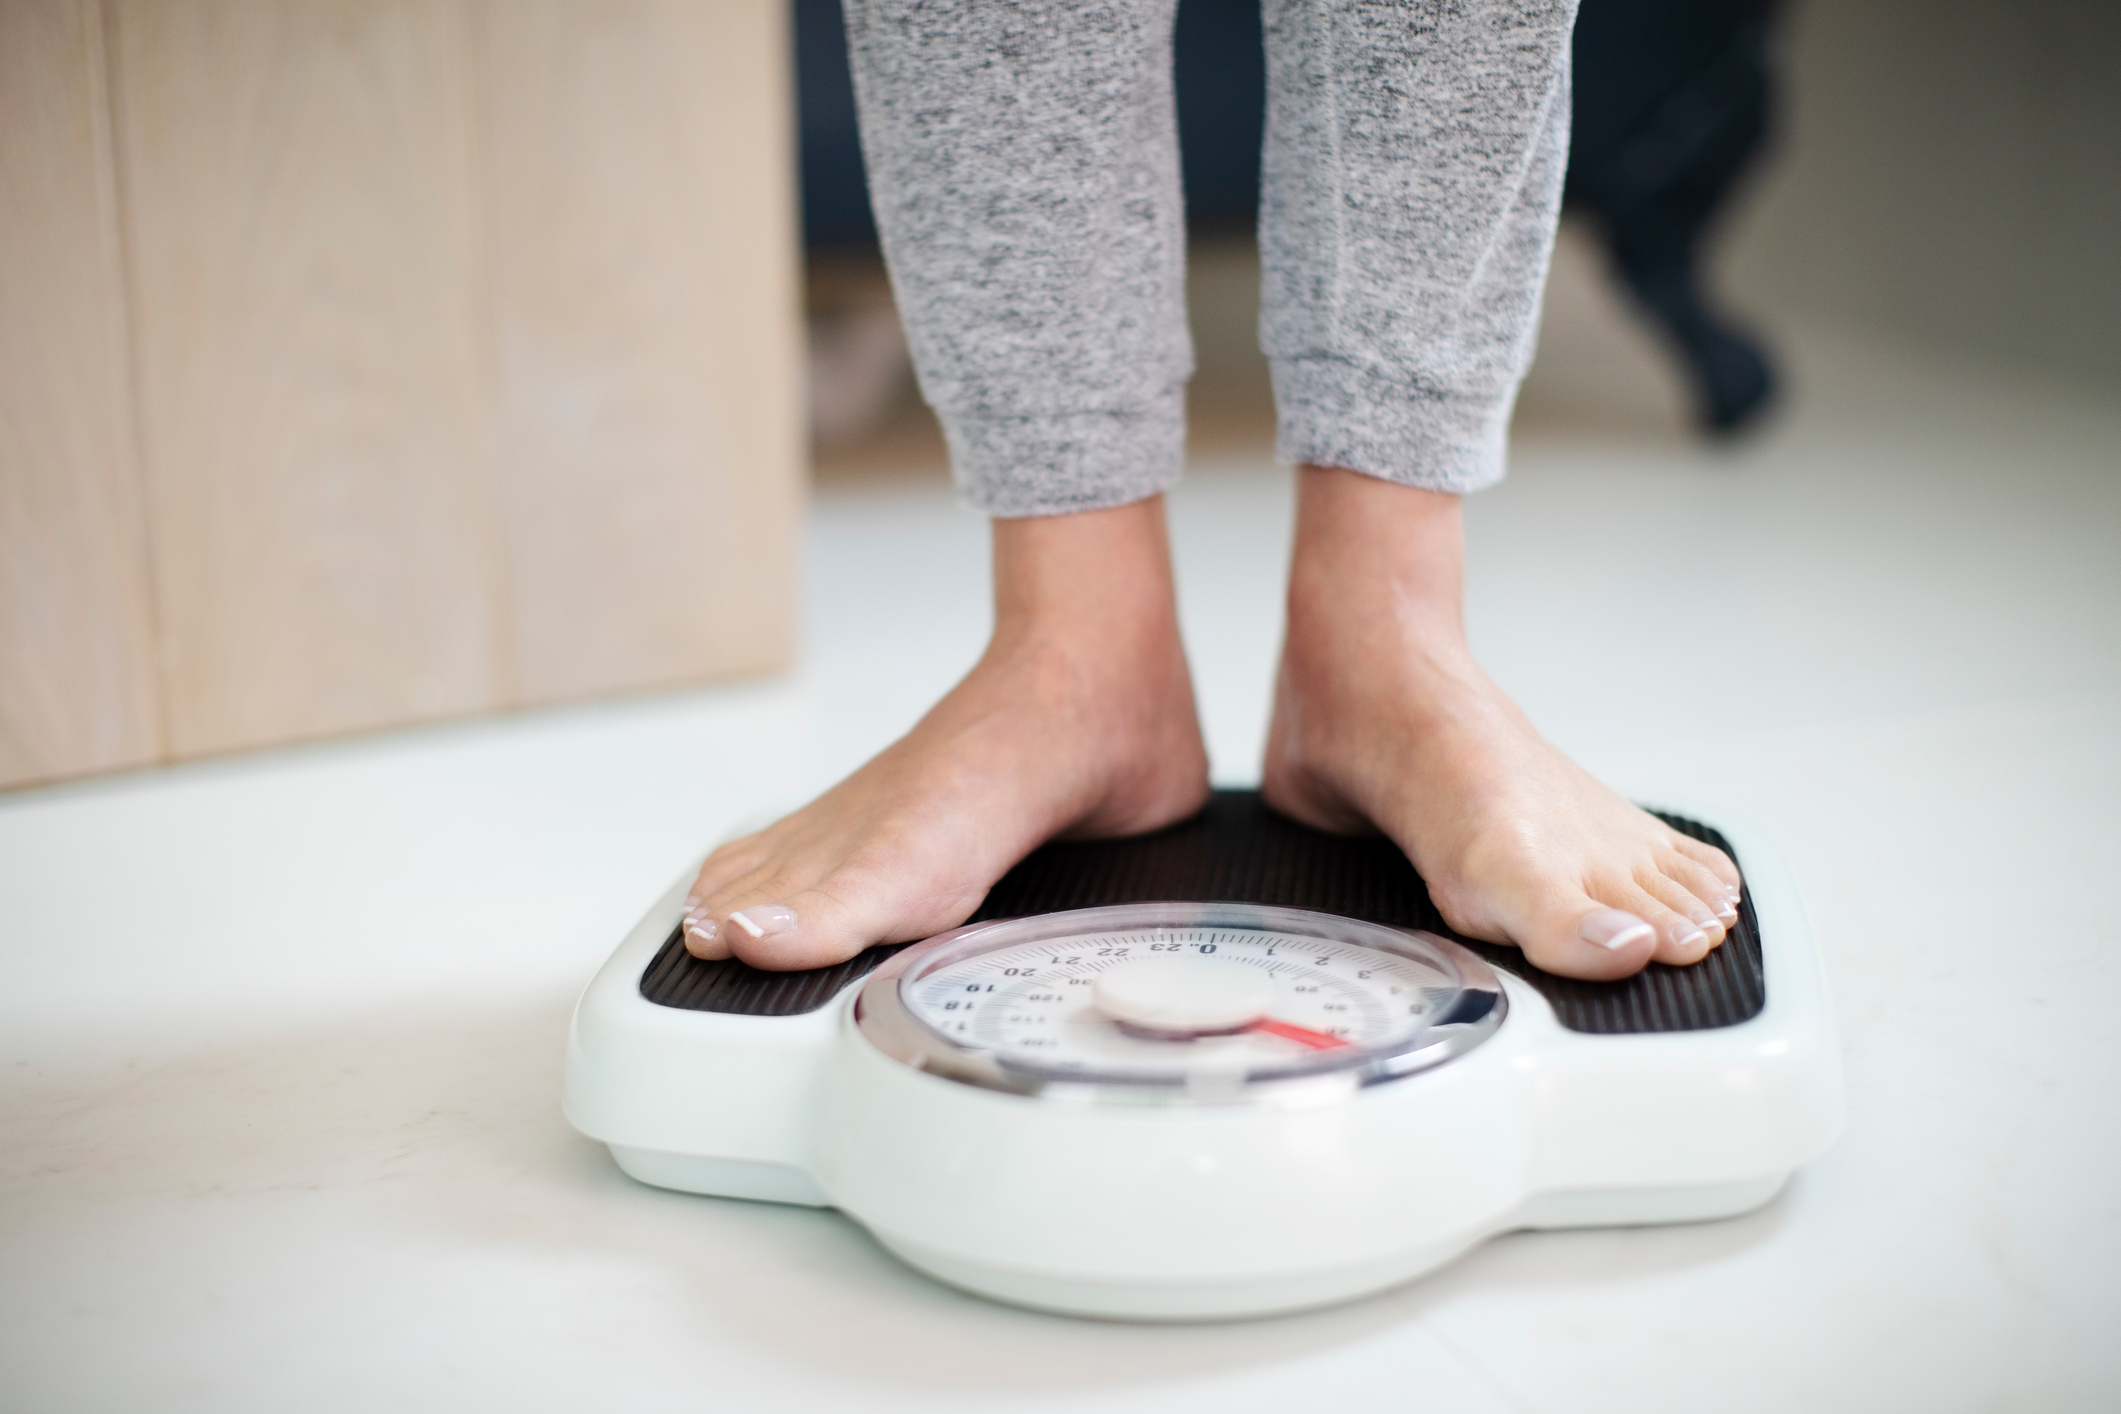 ‘Reach for nature first’: How to avoid self-isolation weight gain